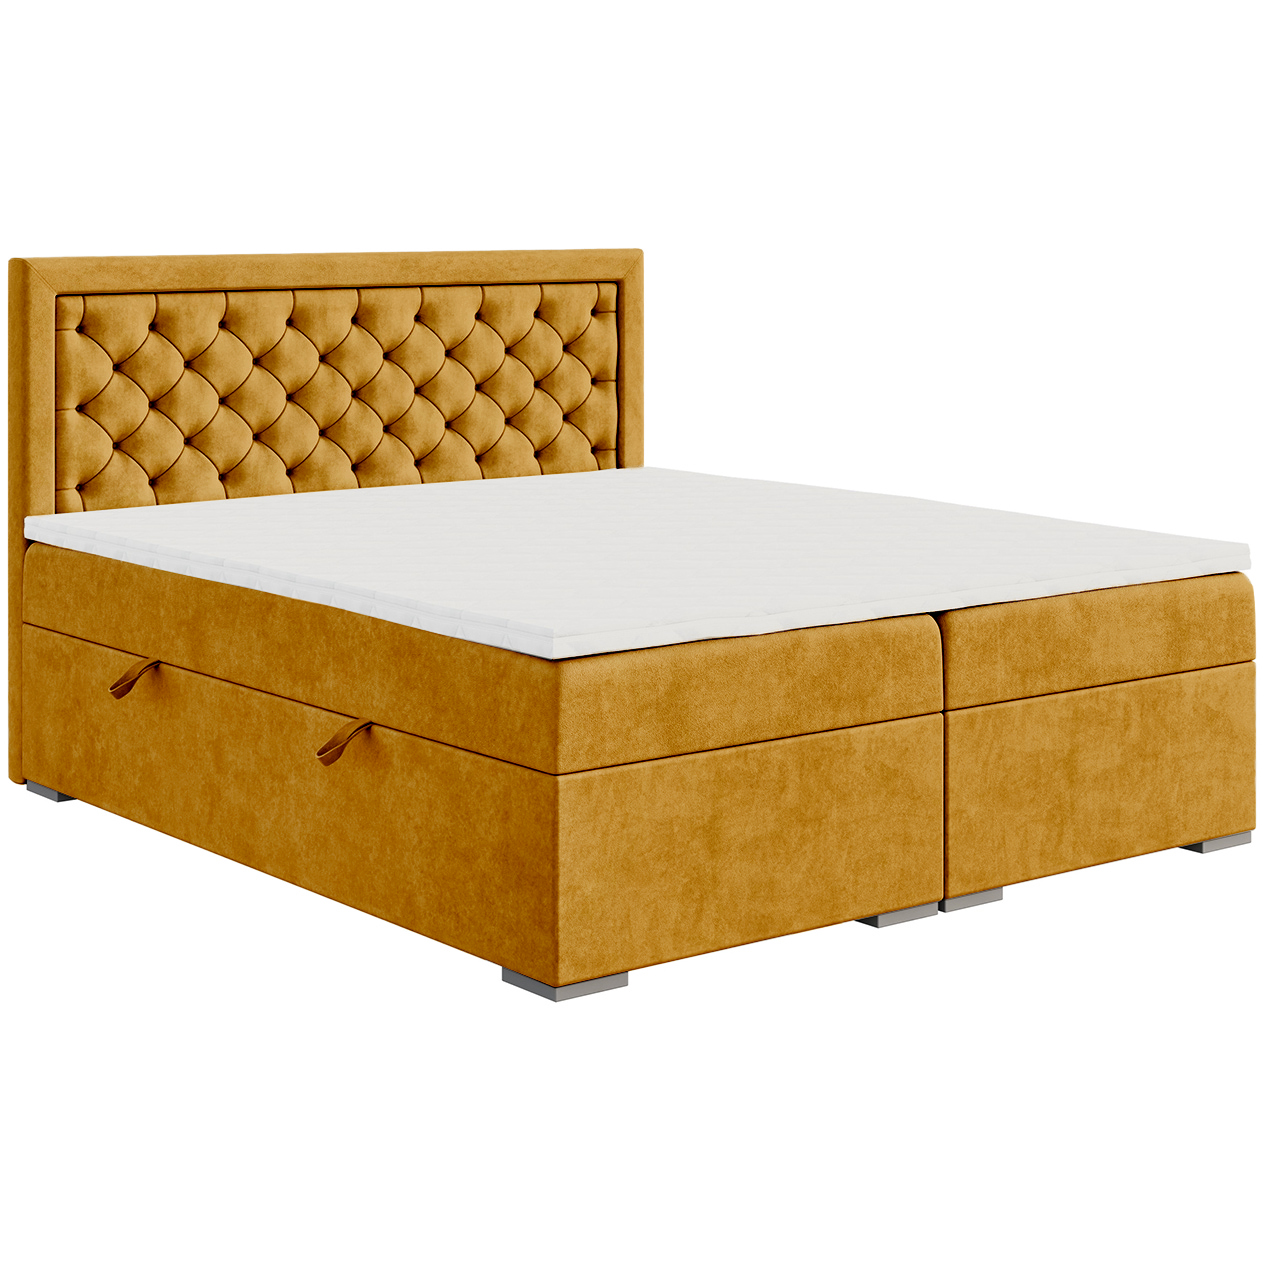 Upholstered bed BLUM 180x200 riviera 41